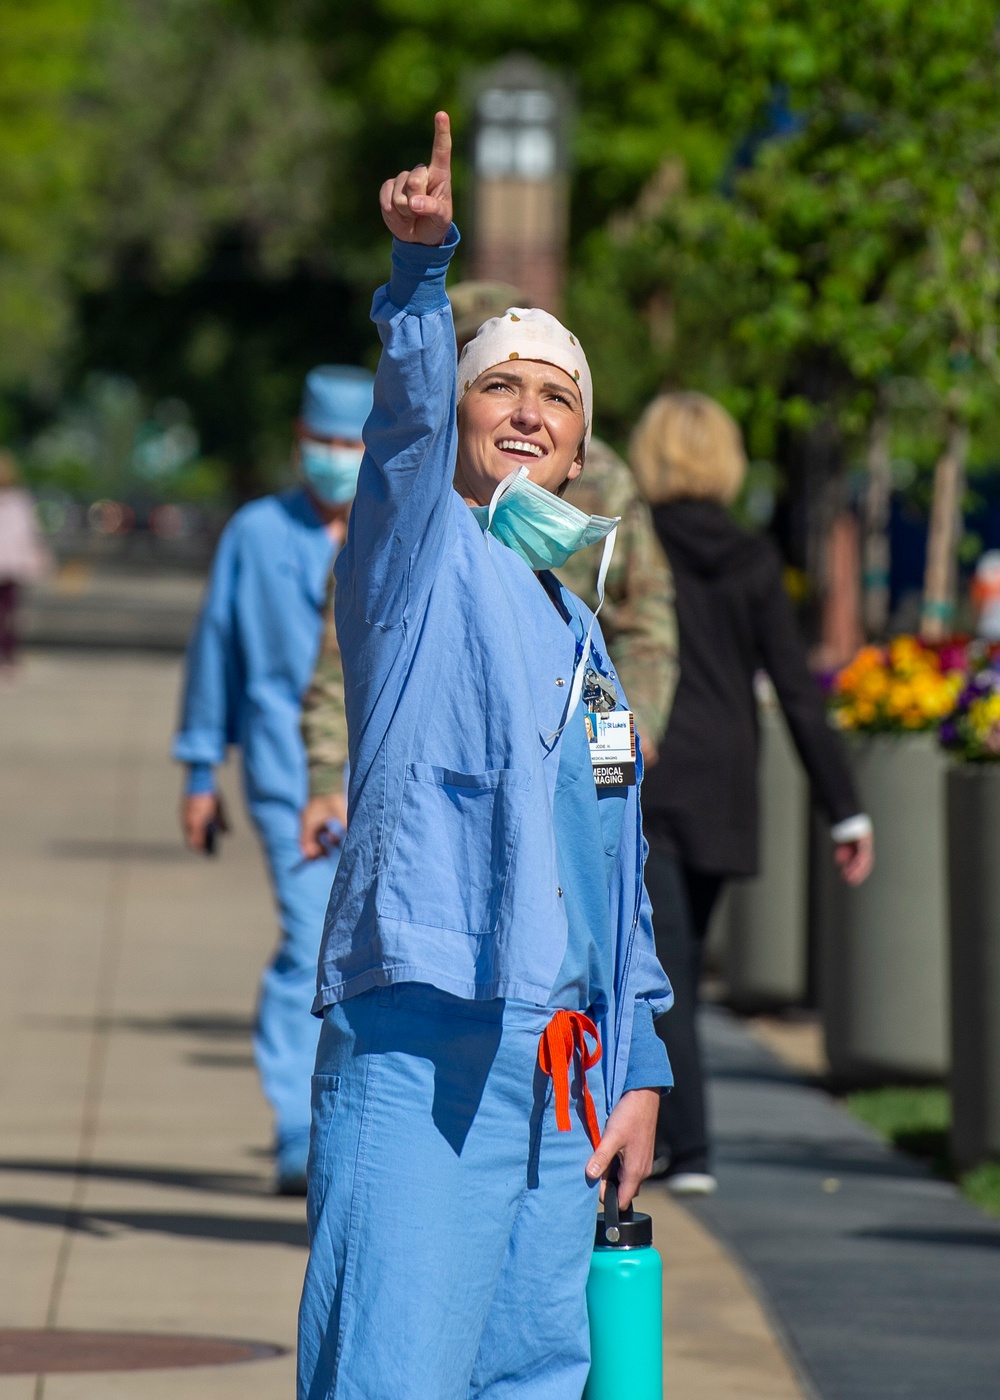 Airmen of 124th Fighter Wing and 366th Fighter Wing Salute Healthcare Workers of Idaho with a Joint Flyover